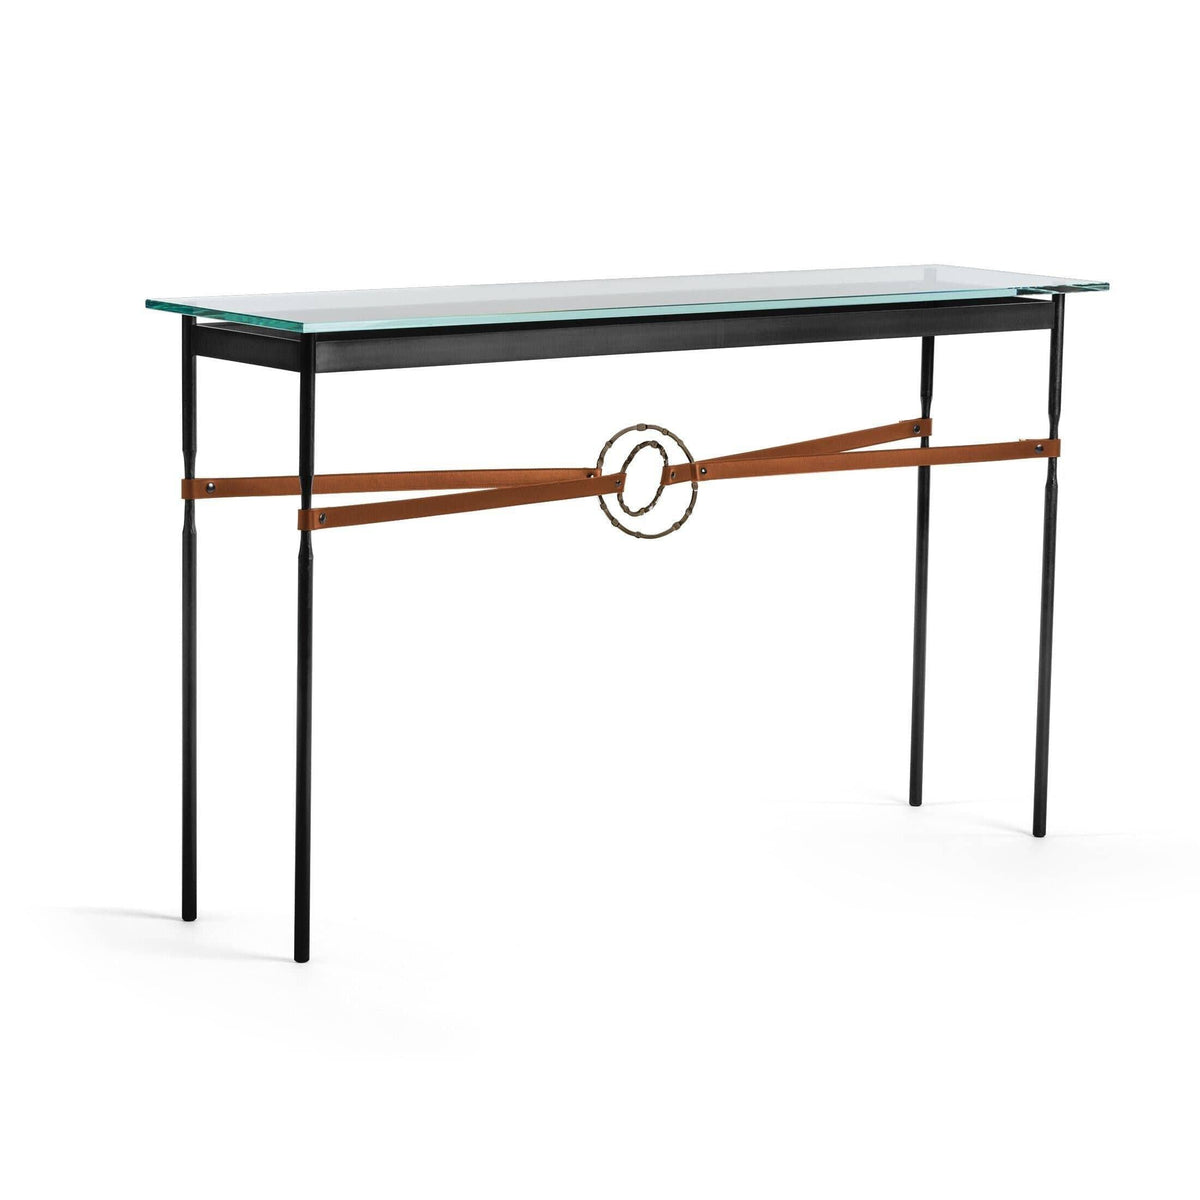 Hubbardton Forge - Equus Chestnut Leather Console Table - 750118-10-05-LC-VA0714 | Montreal Lighting & Hardware